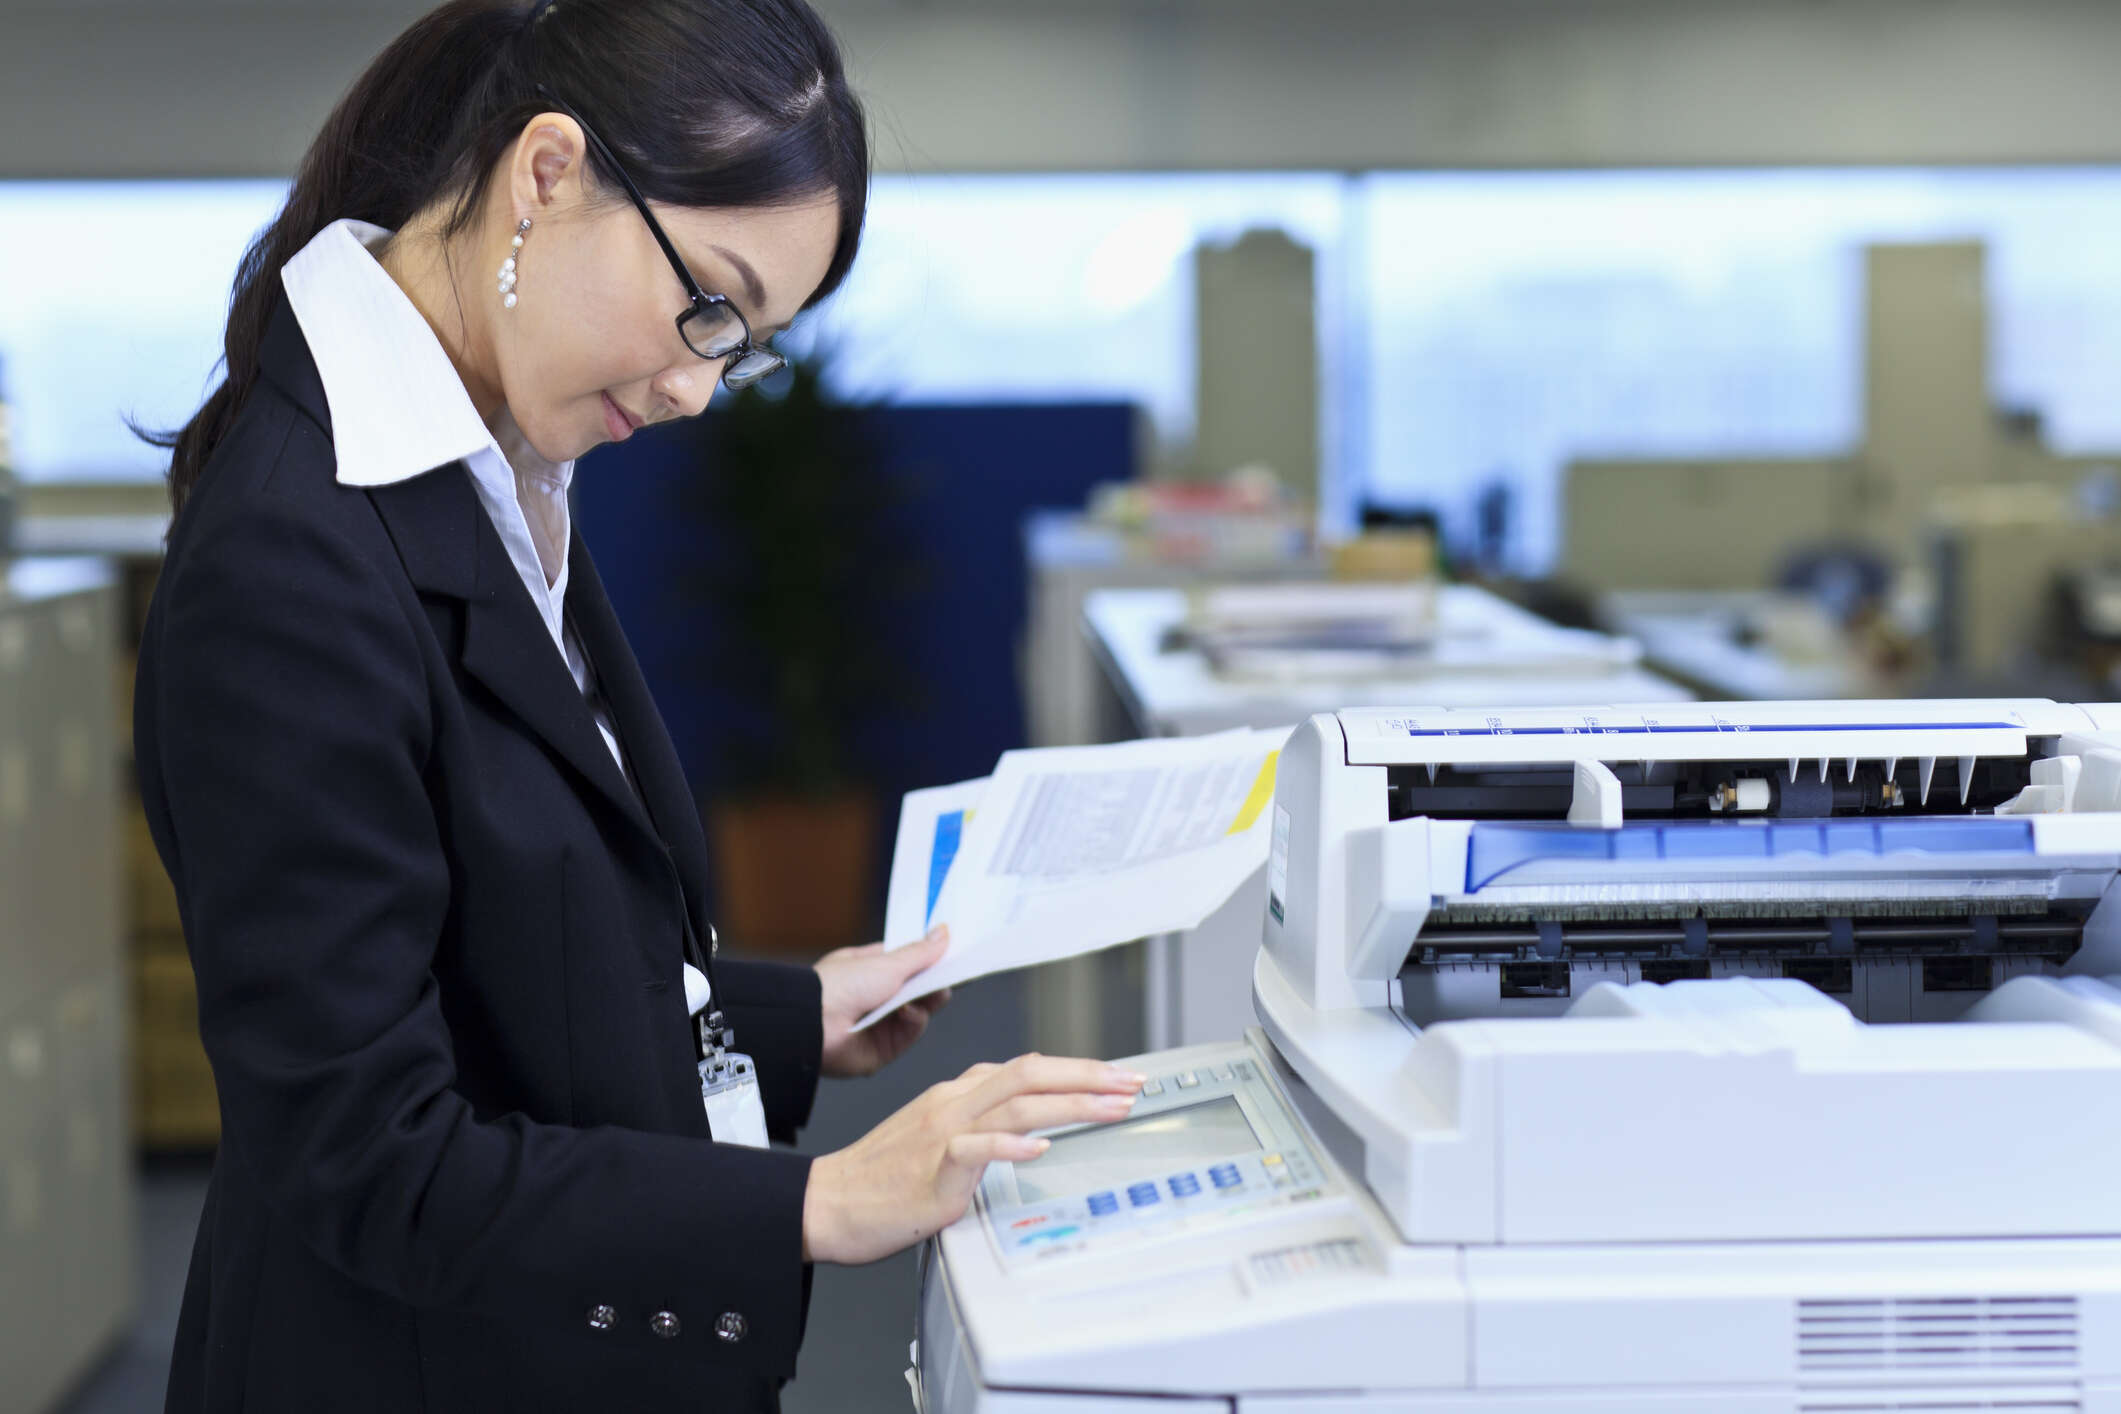 Switch from laser to inkjet could 'halve global printing emissions' by 2025